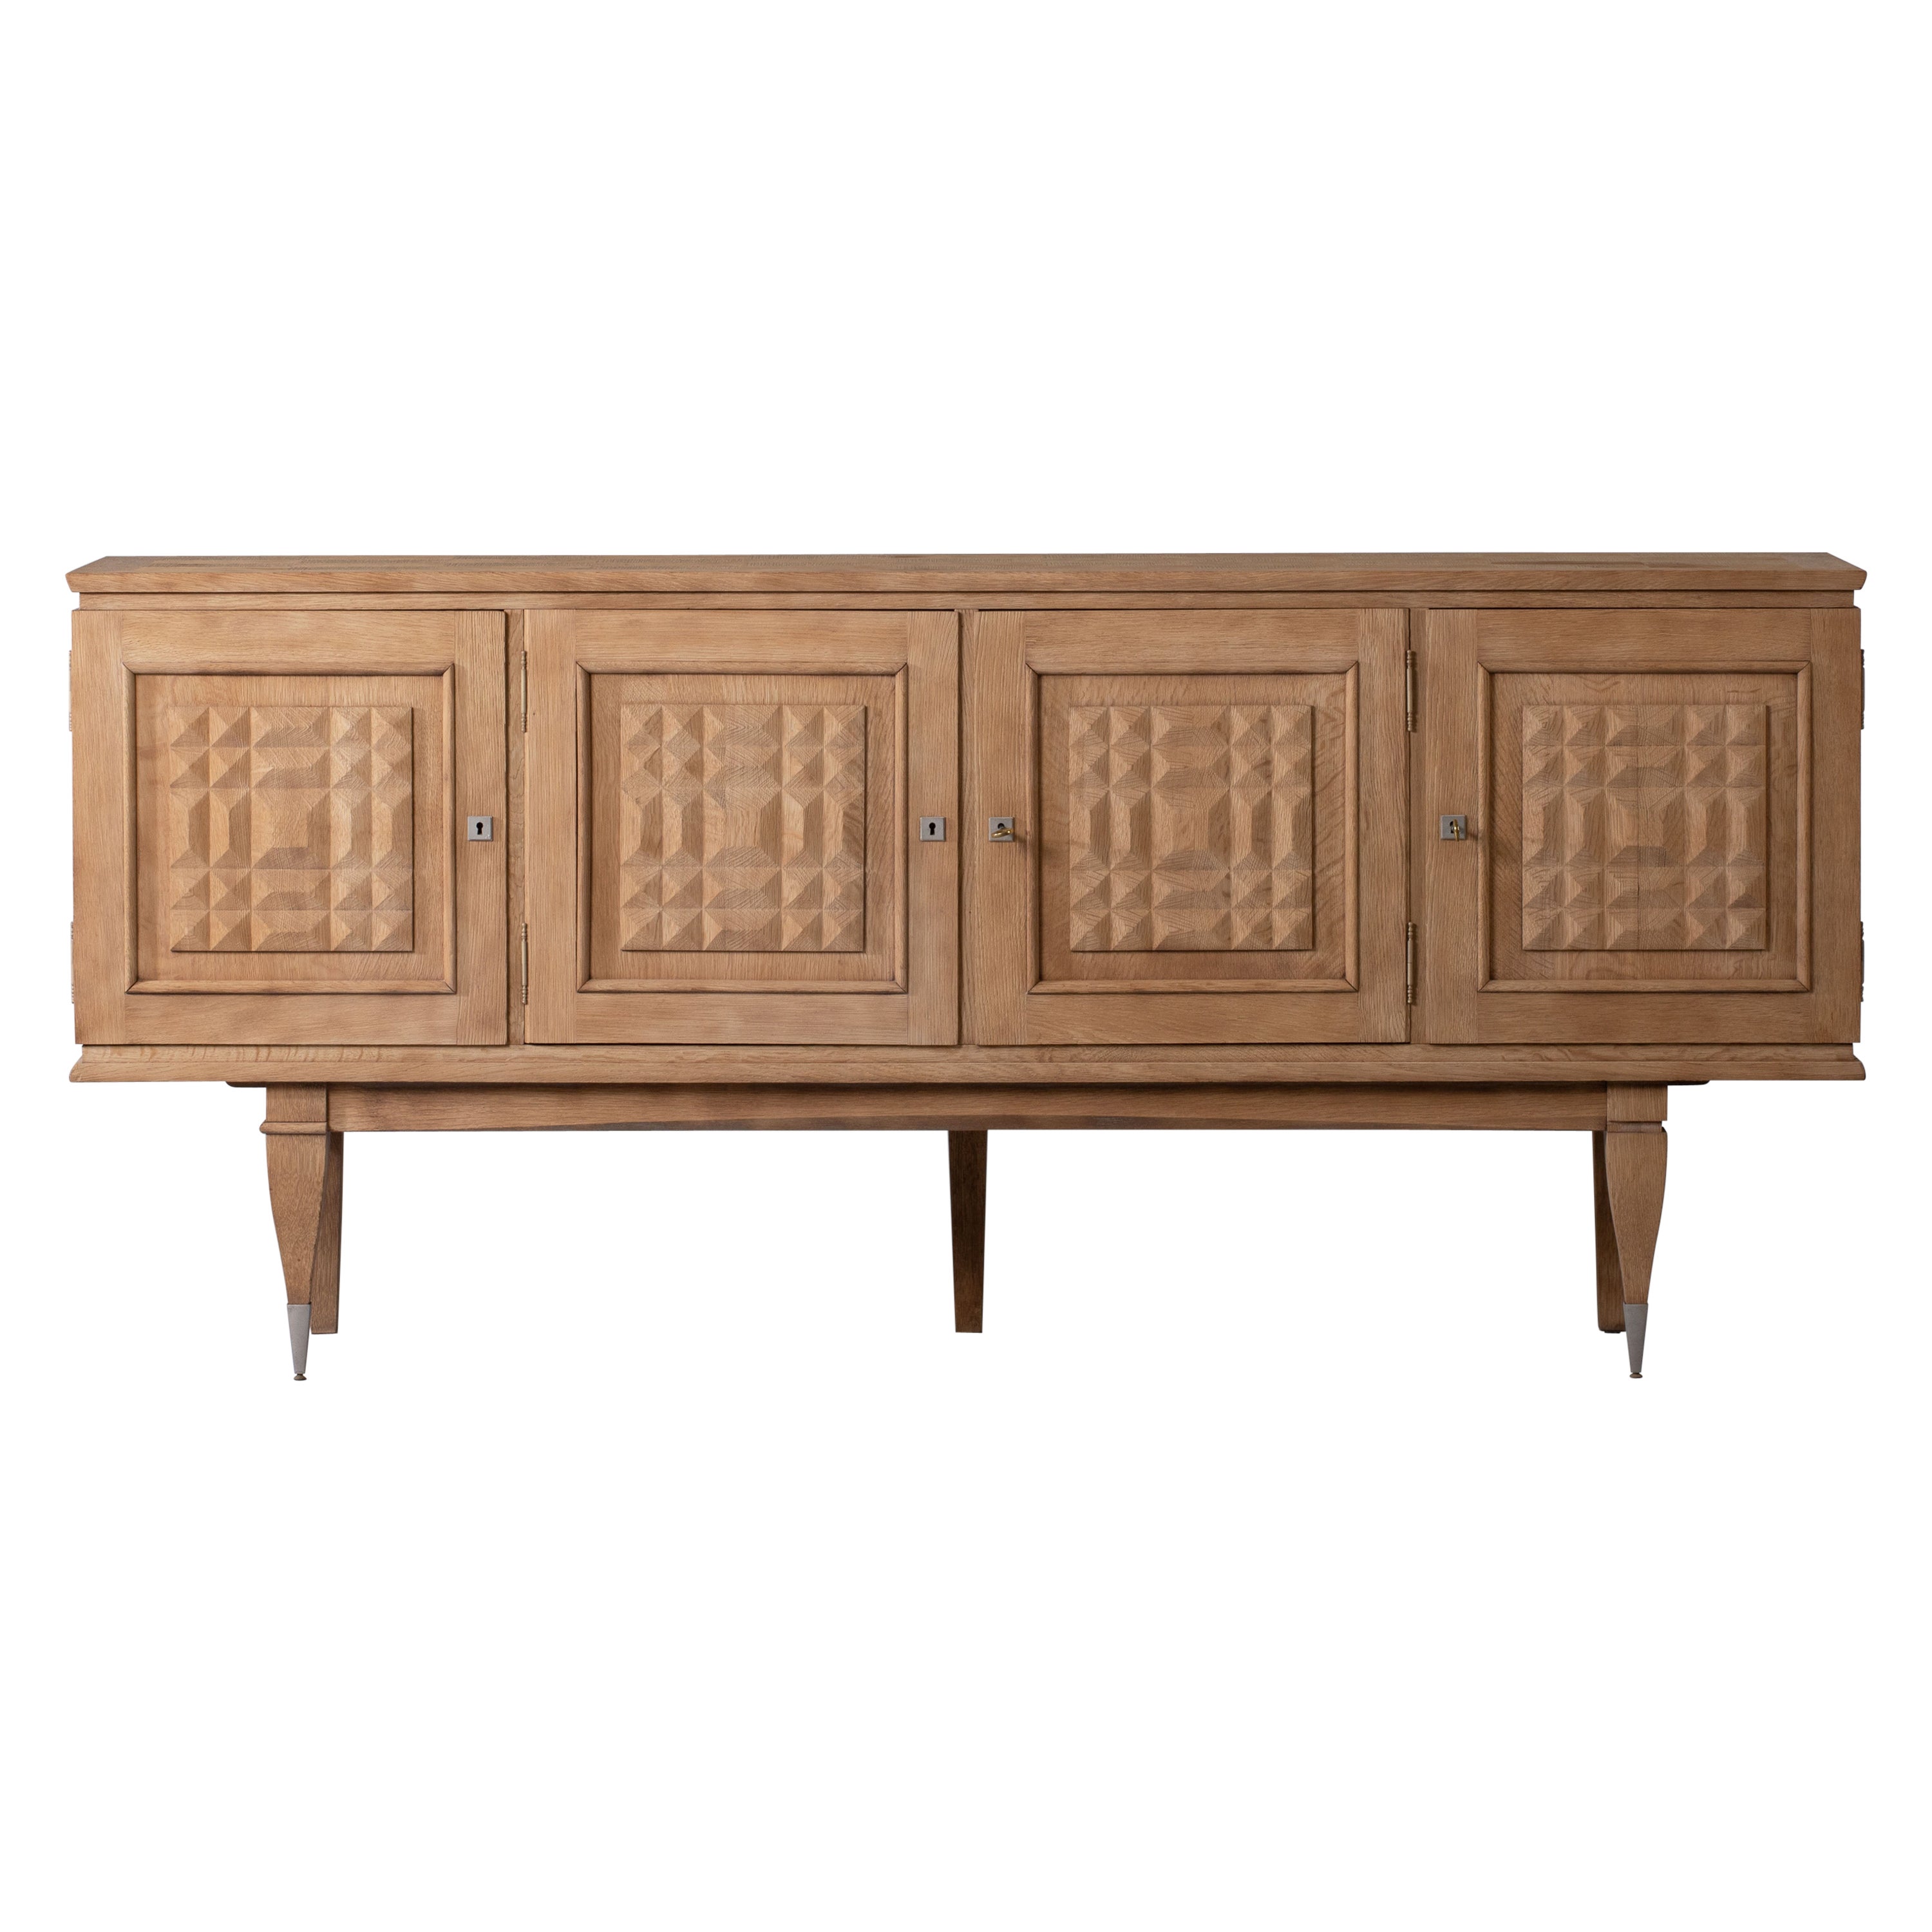 Bleached Solid Oak Credenza with Diamonds Details, France, 1940s